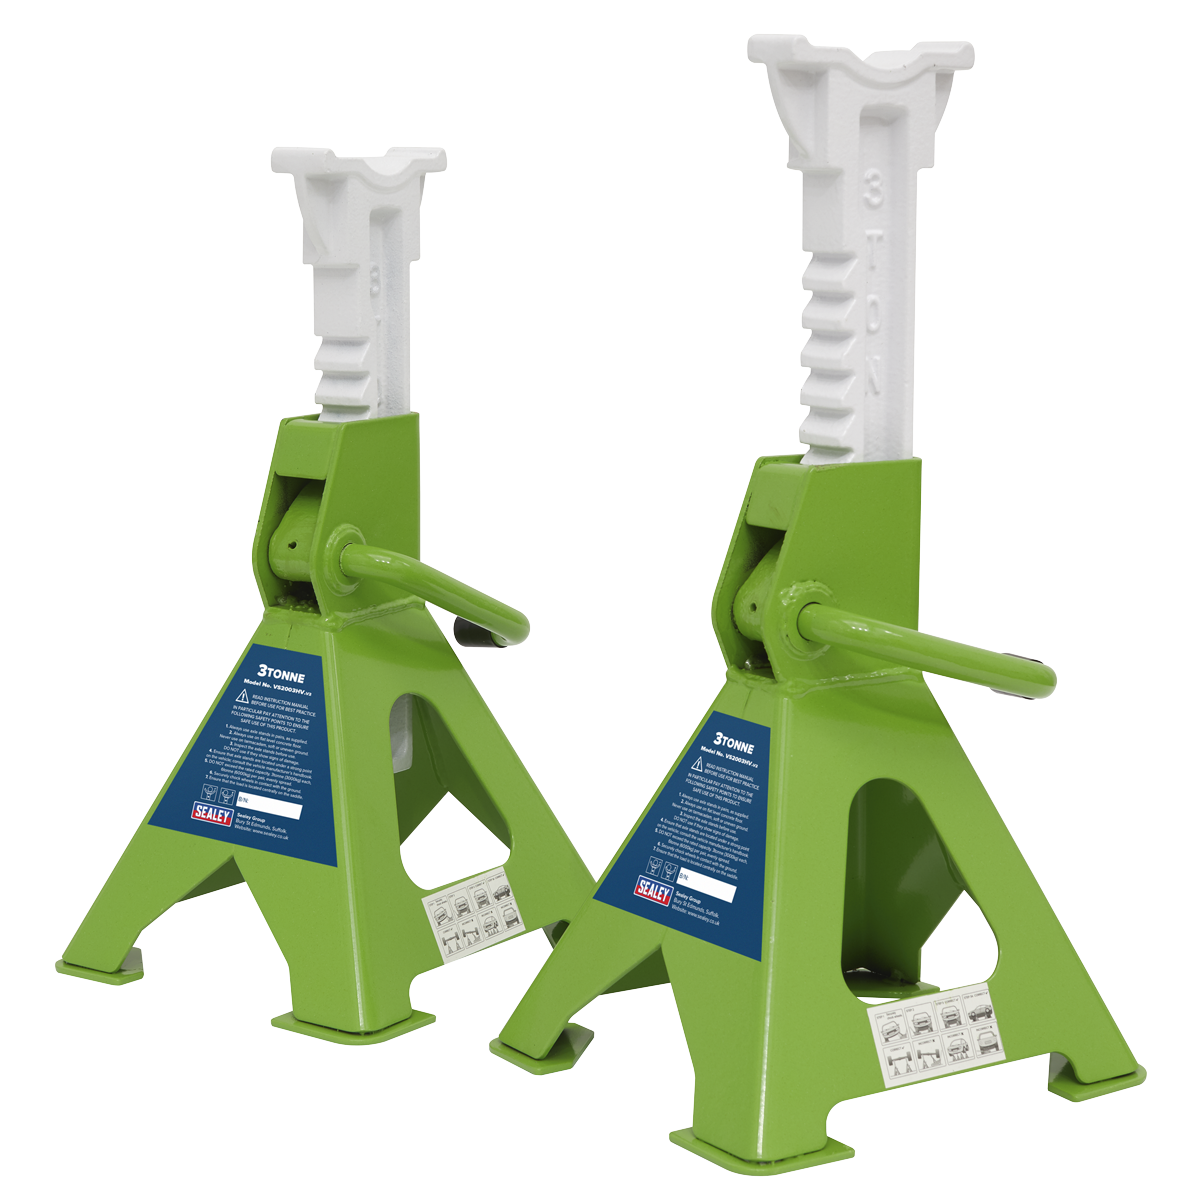 Sealey VS2003HV Ratchet Type Axle Stands (Pair) 3 Tonne Capacity per Stand - Hi-Vis Green